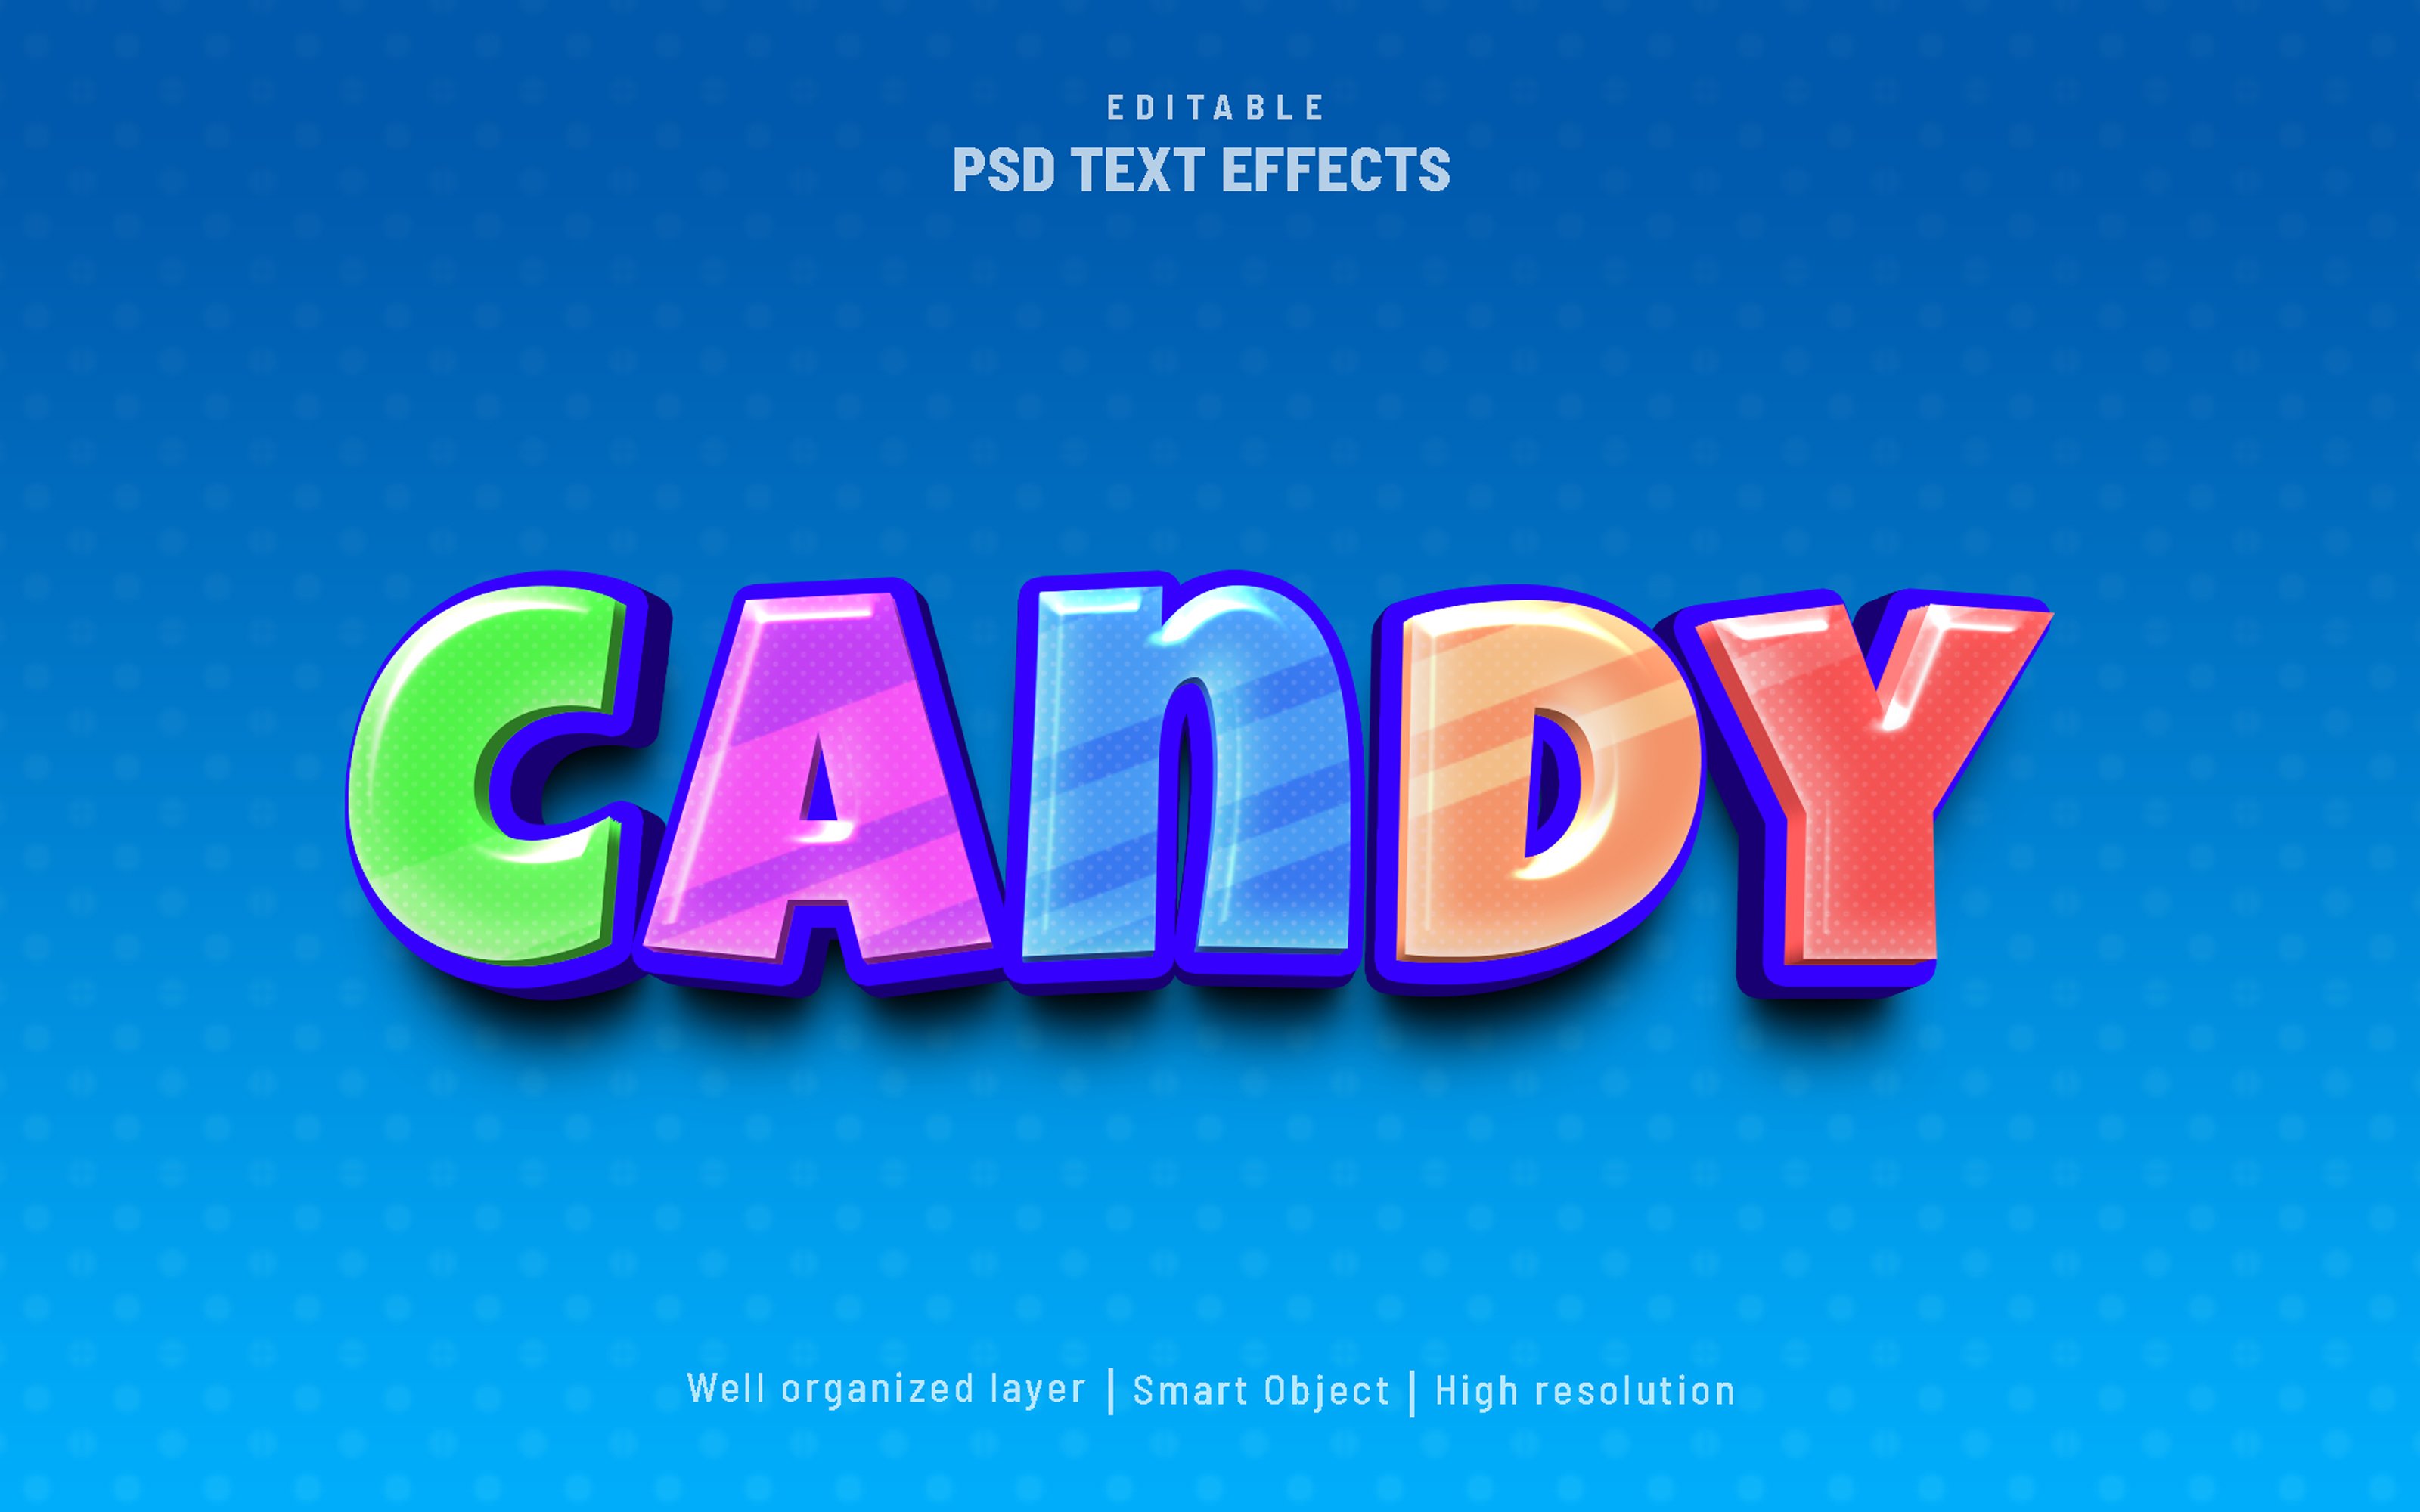 Candy editable text effect PSDcover image.